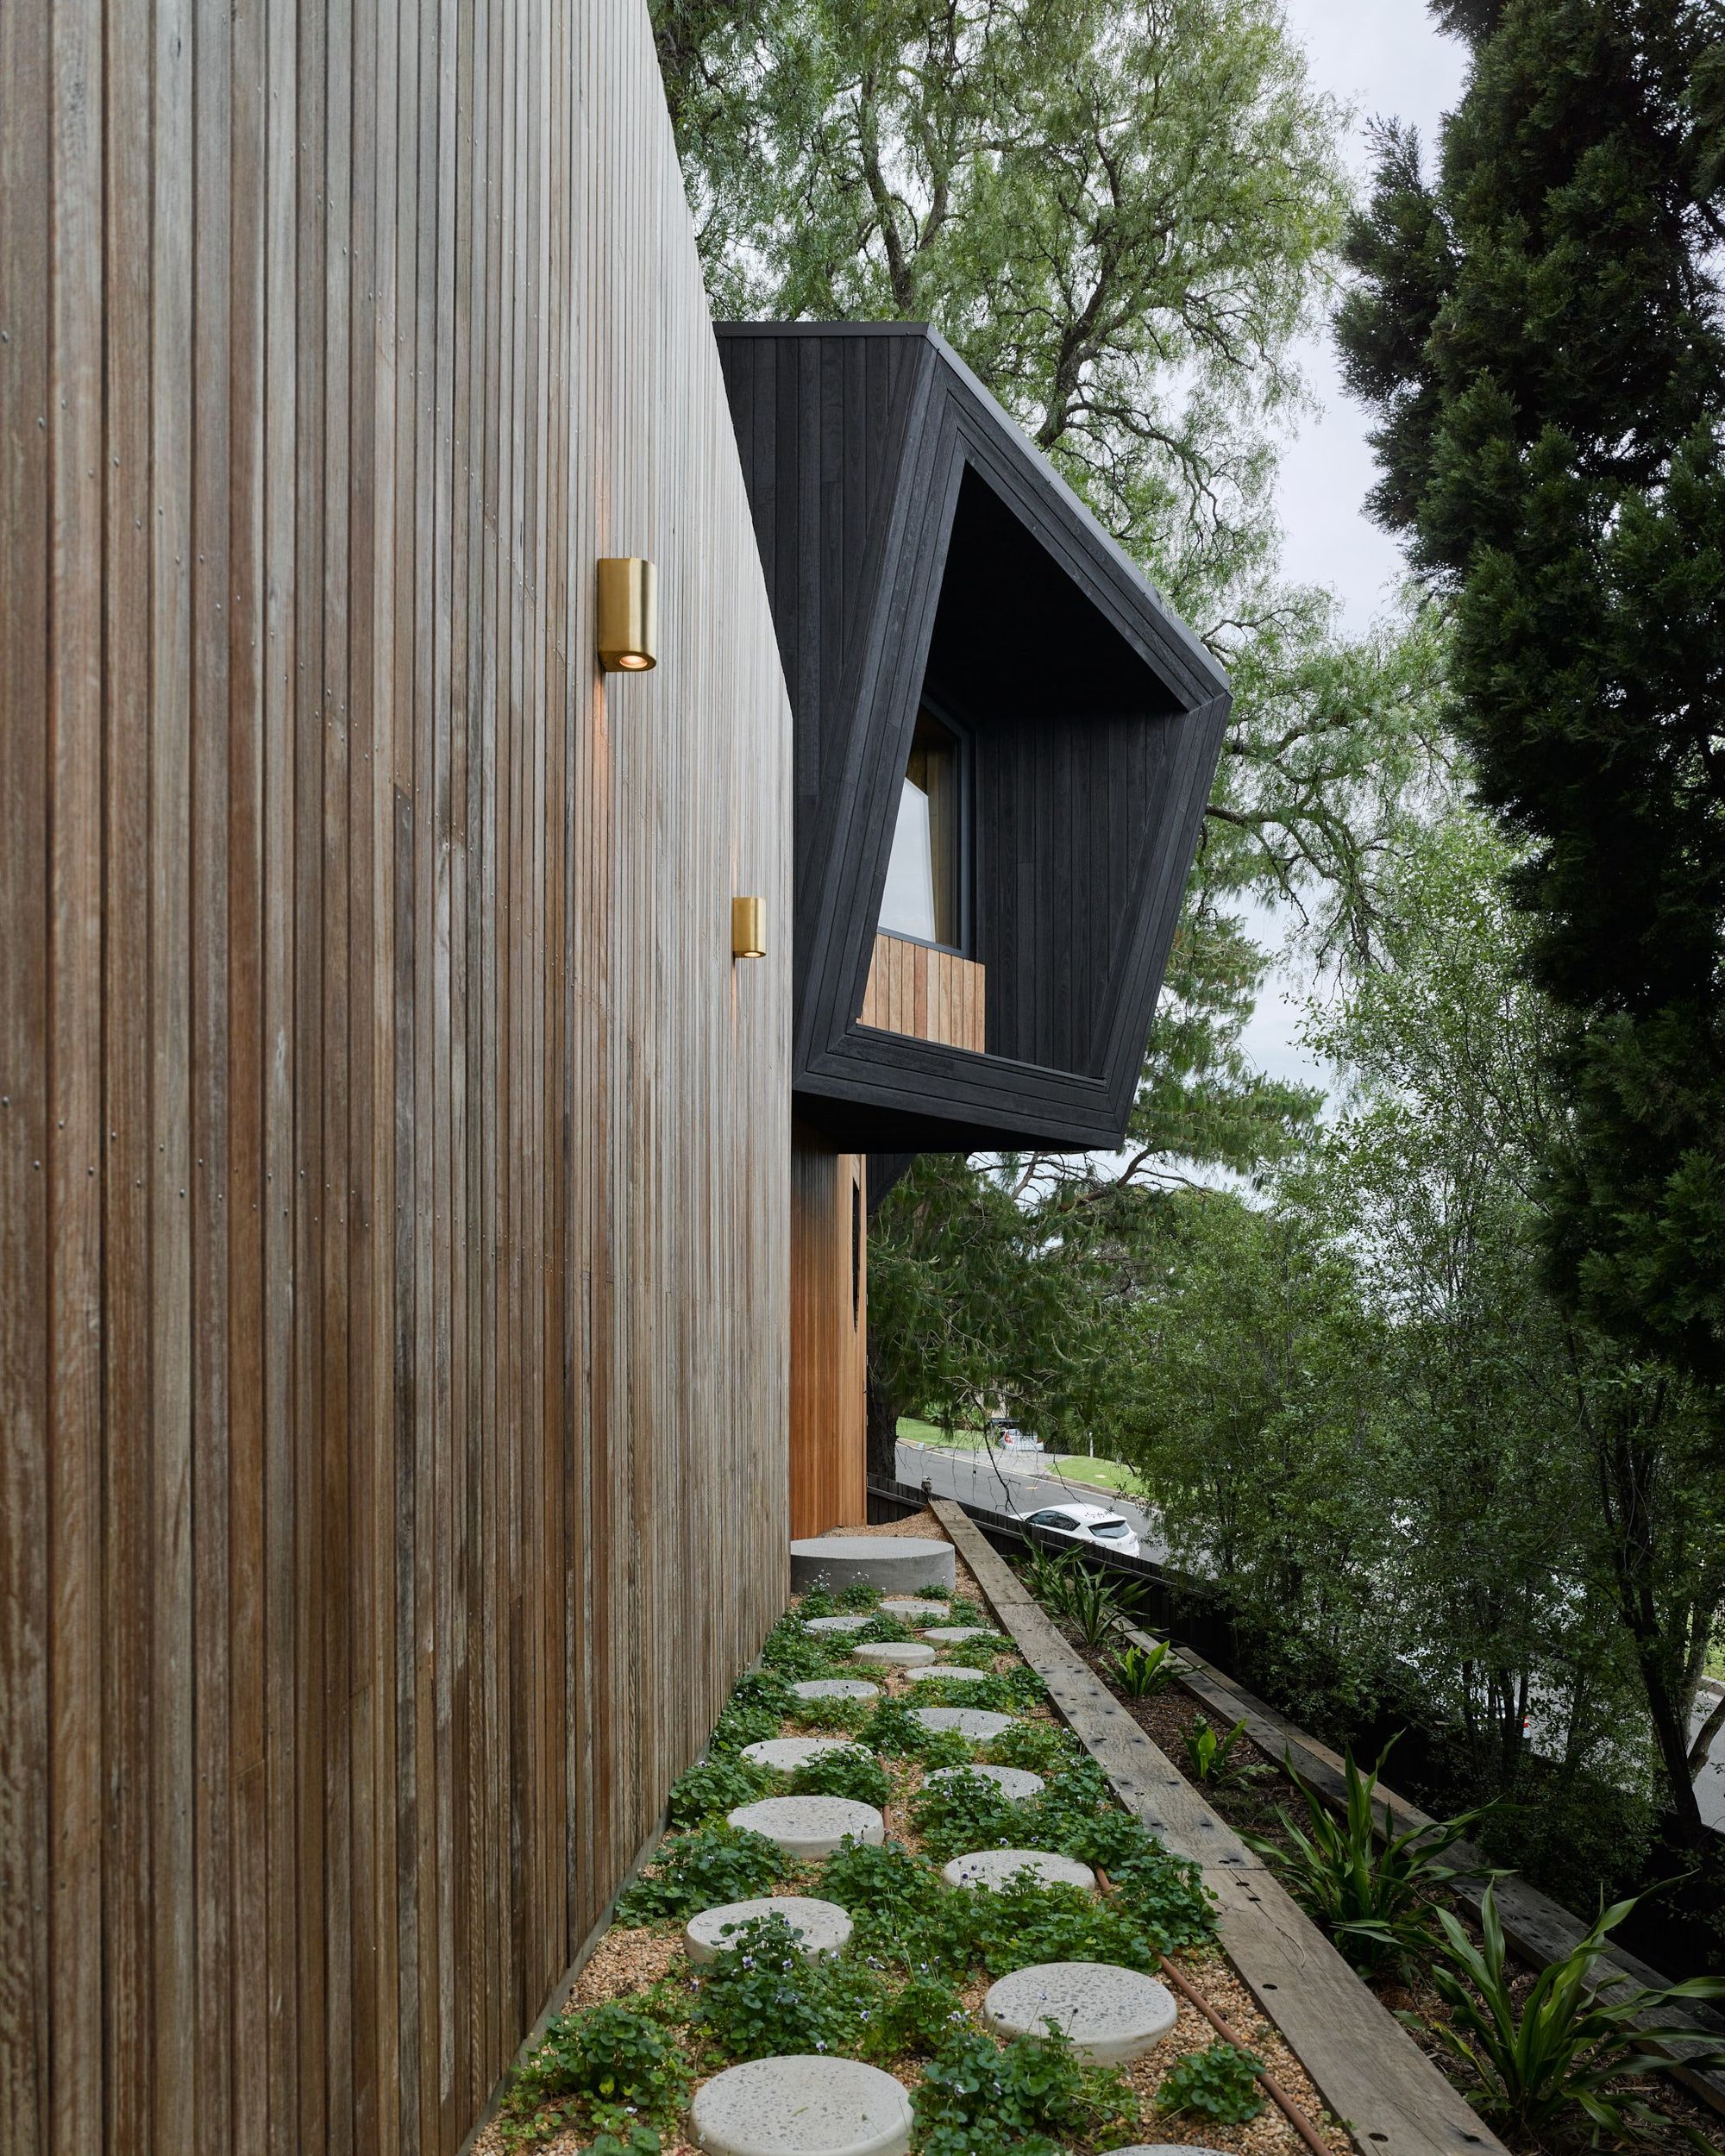 Pepper Tree Passive House by Alexander Symes Architect showing entry steppers